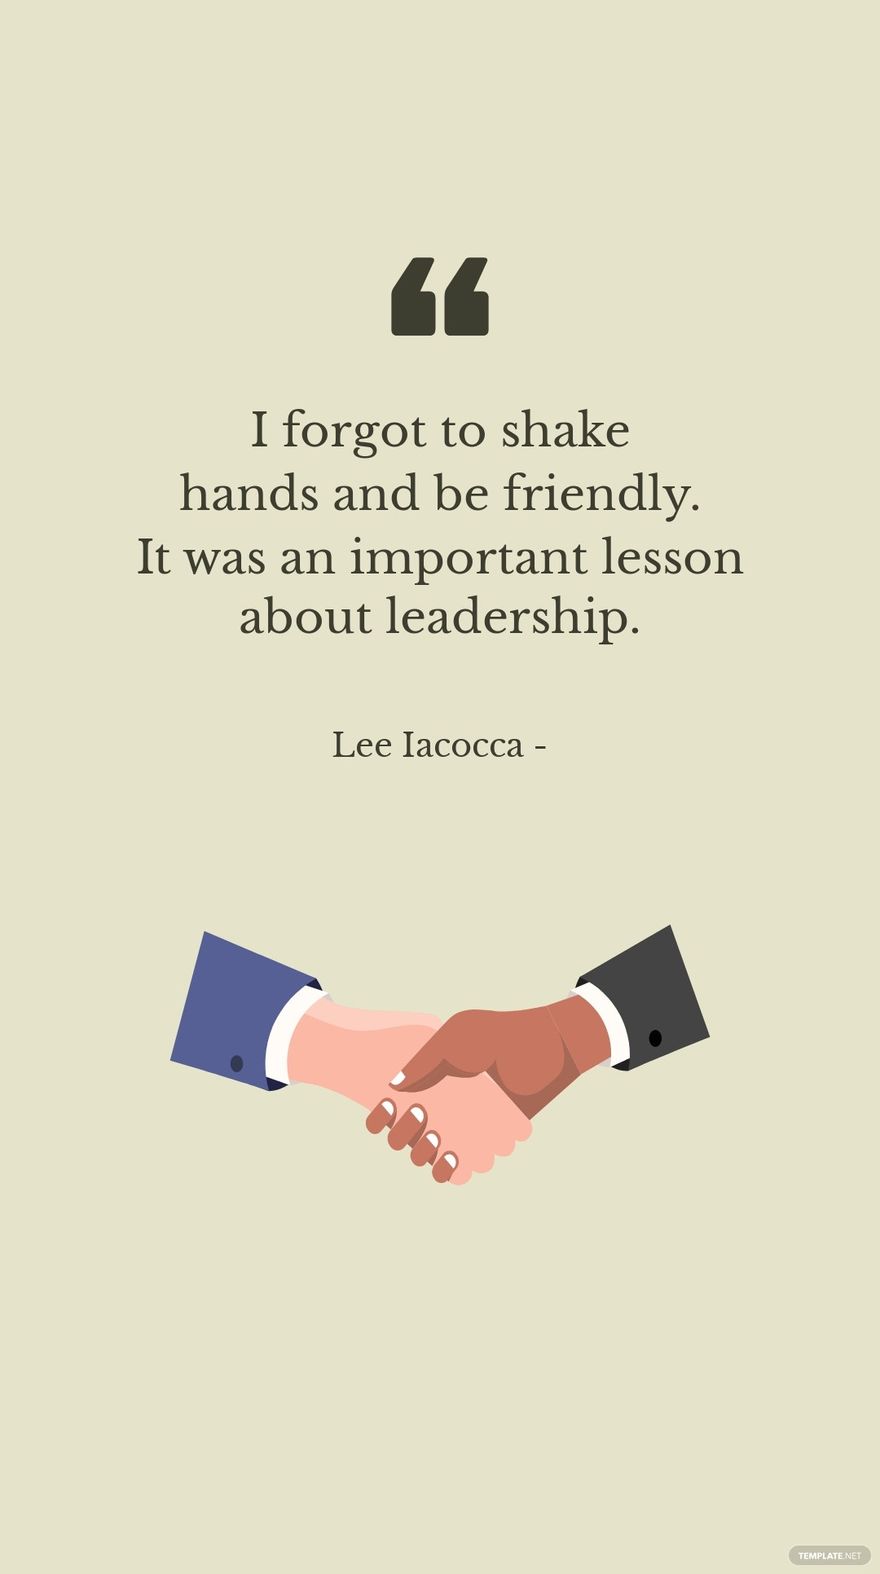 Free Lee Iacocca - I forgot to shake hands and be friendly. It was an important lesson about leadership.